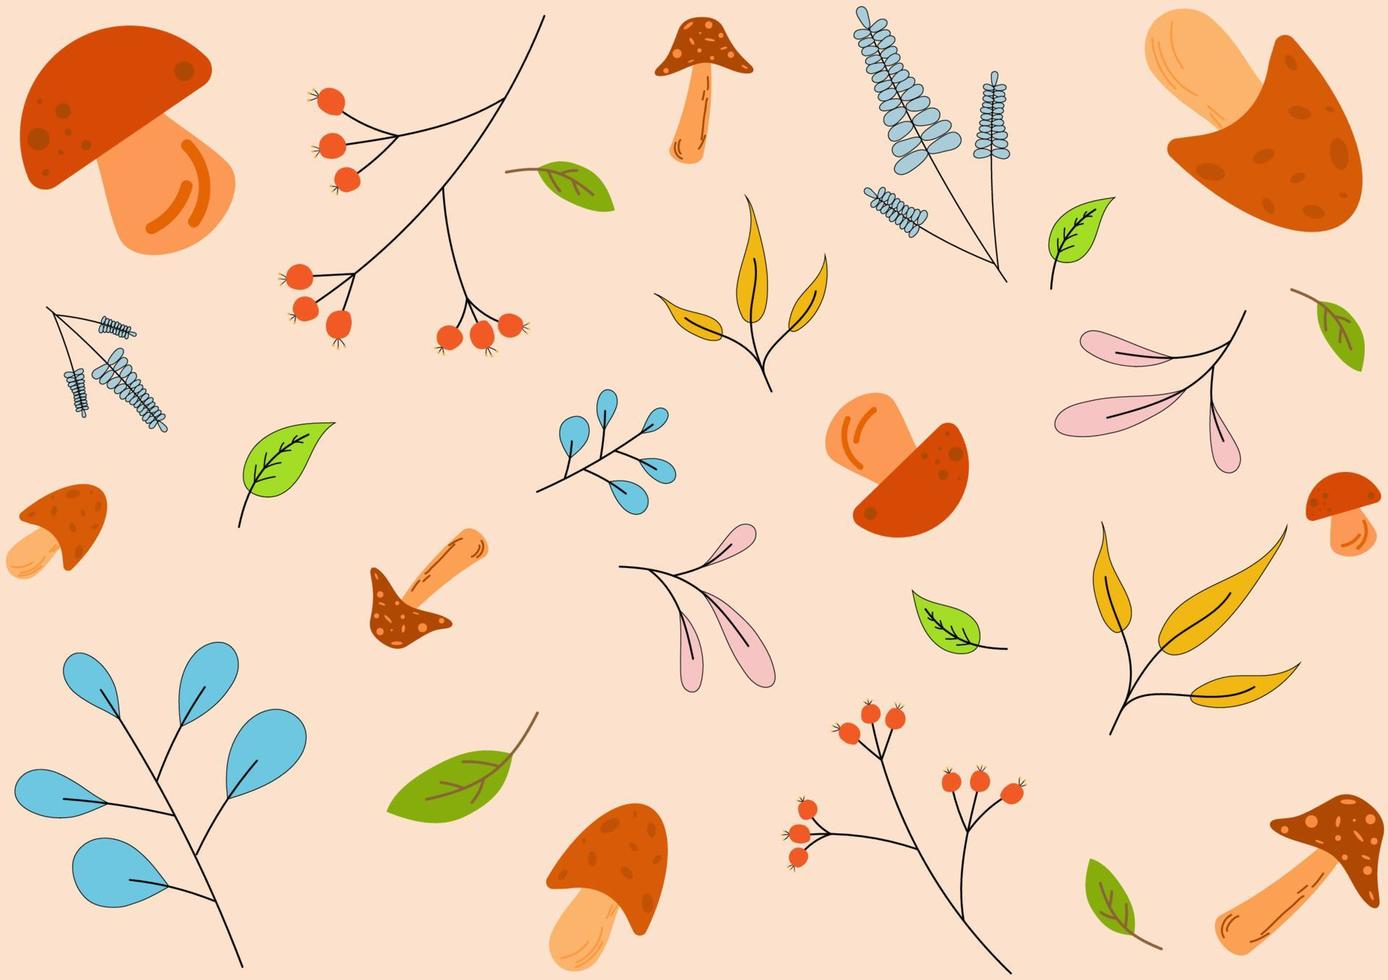 Lovely mushrooms, flowers and leaves arranged alternately. On a brown background, design for clothes, cover pattern, bags, towels, blankets, baby items, fabric pattern. vector